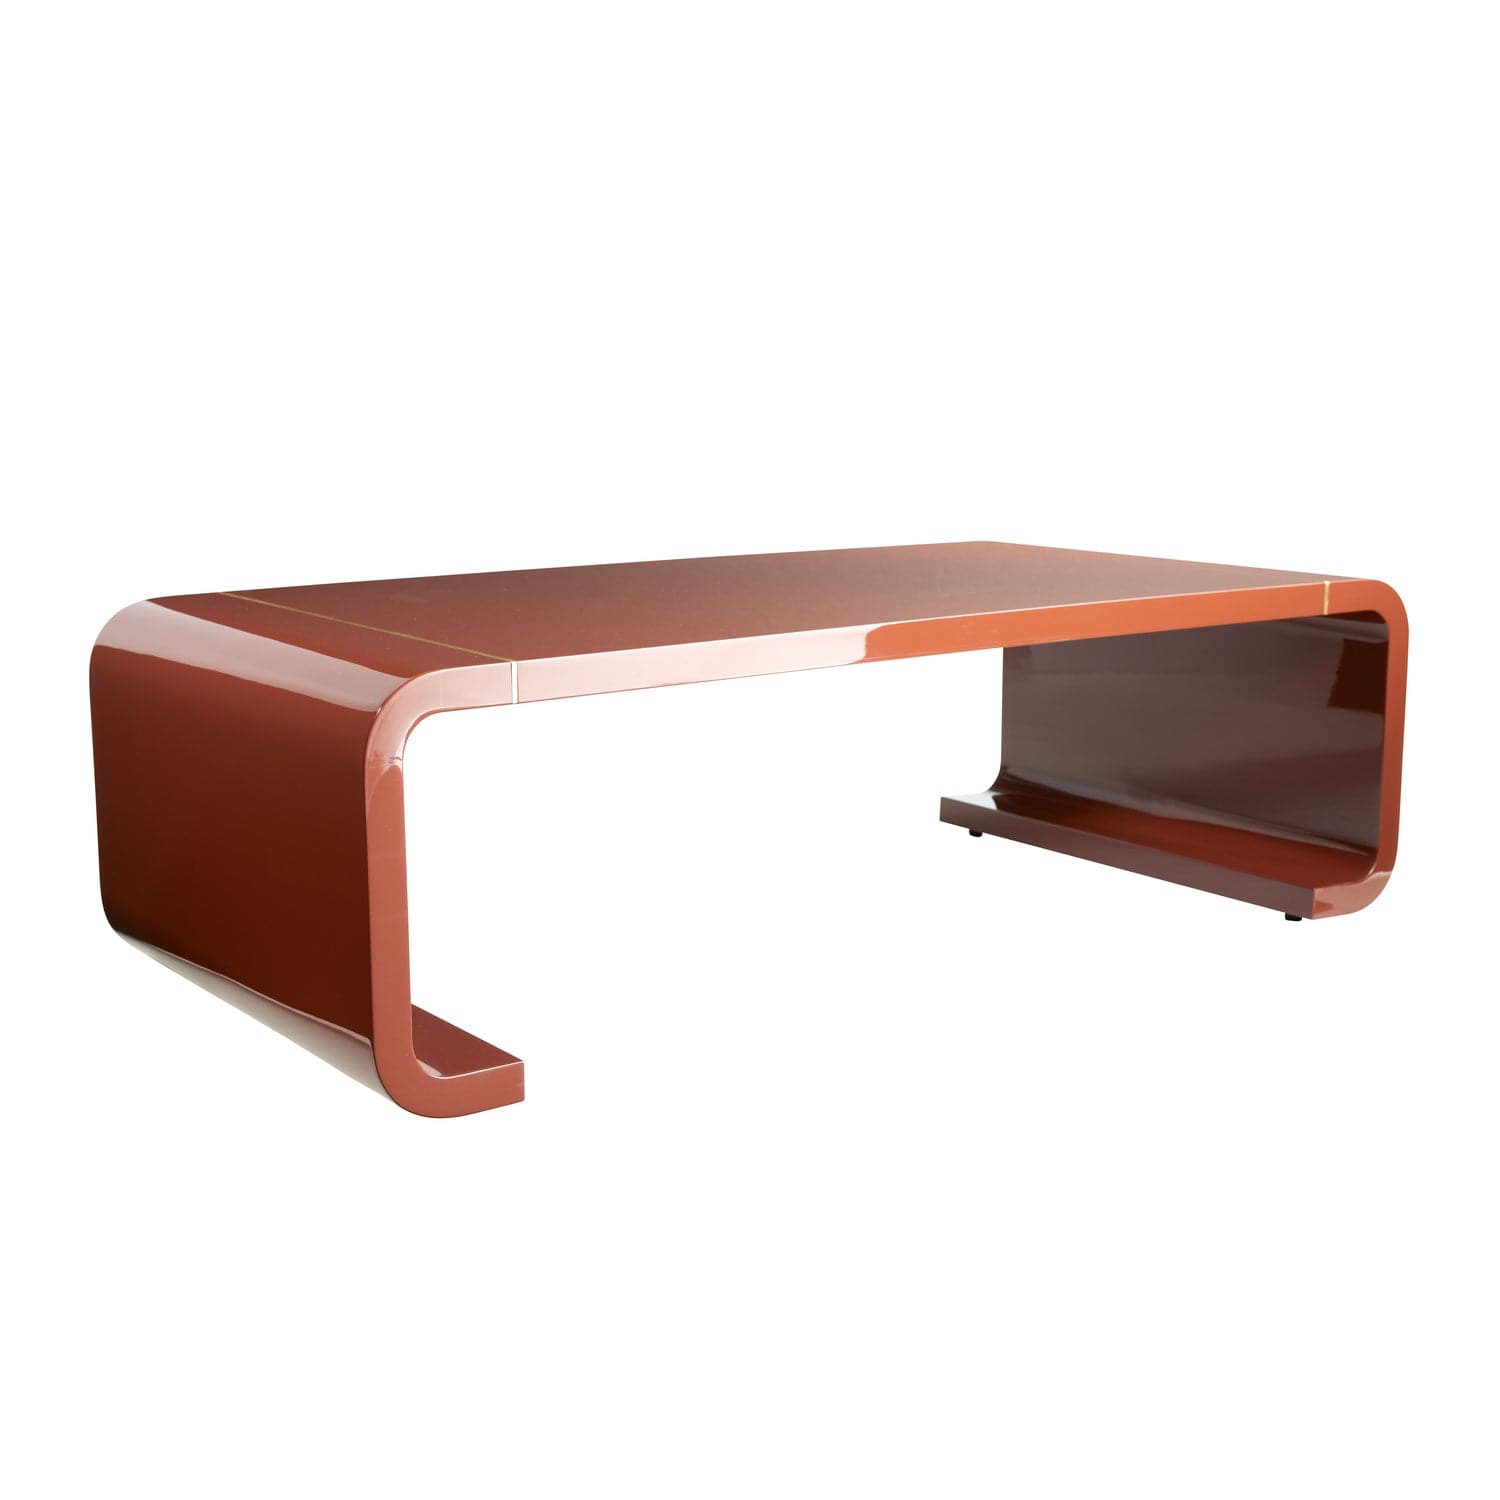 Arteriors - 5094 - Cocktail Table - Turnley - Paprika